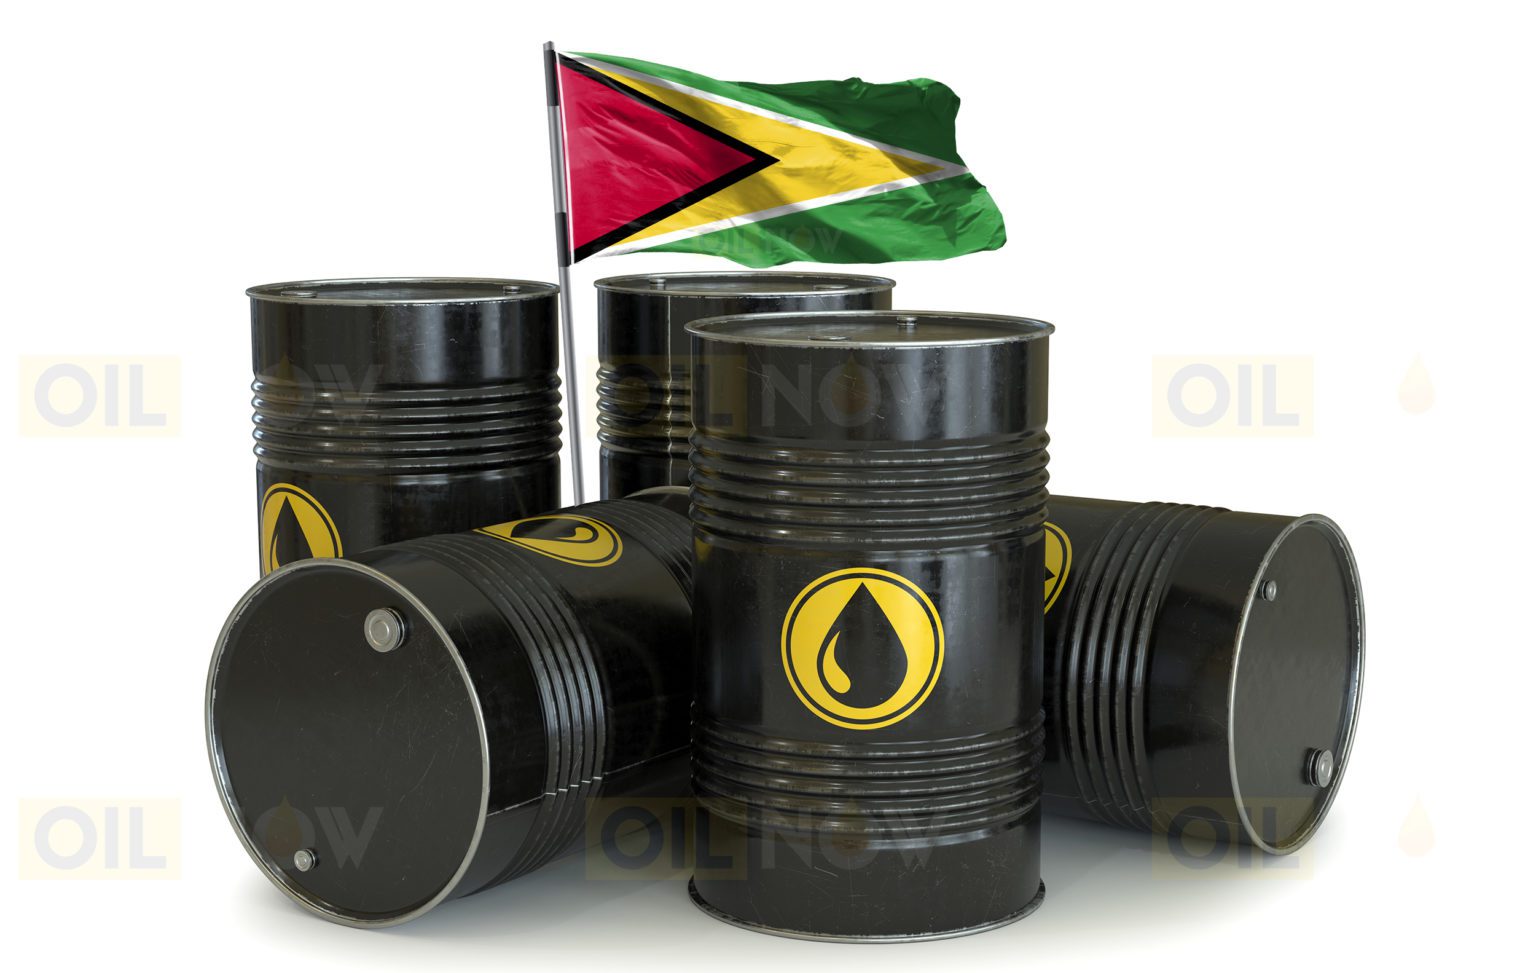 https://oilnow.gy/wp-content/uploads/2022/02/Flag-and-oil-barrels-2-1536x973.jpg